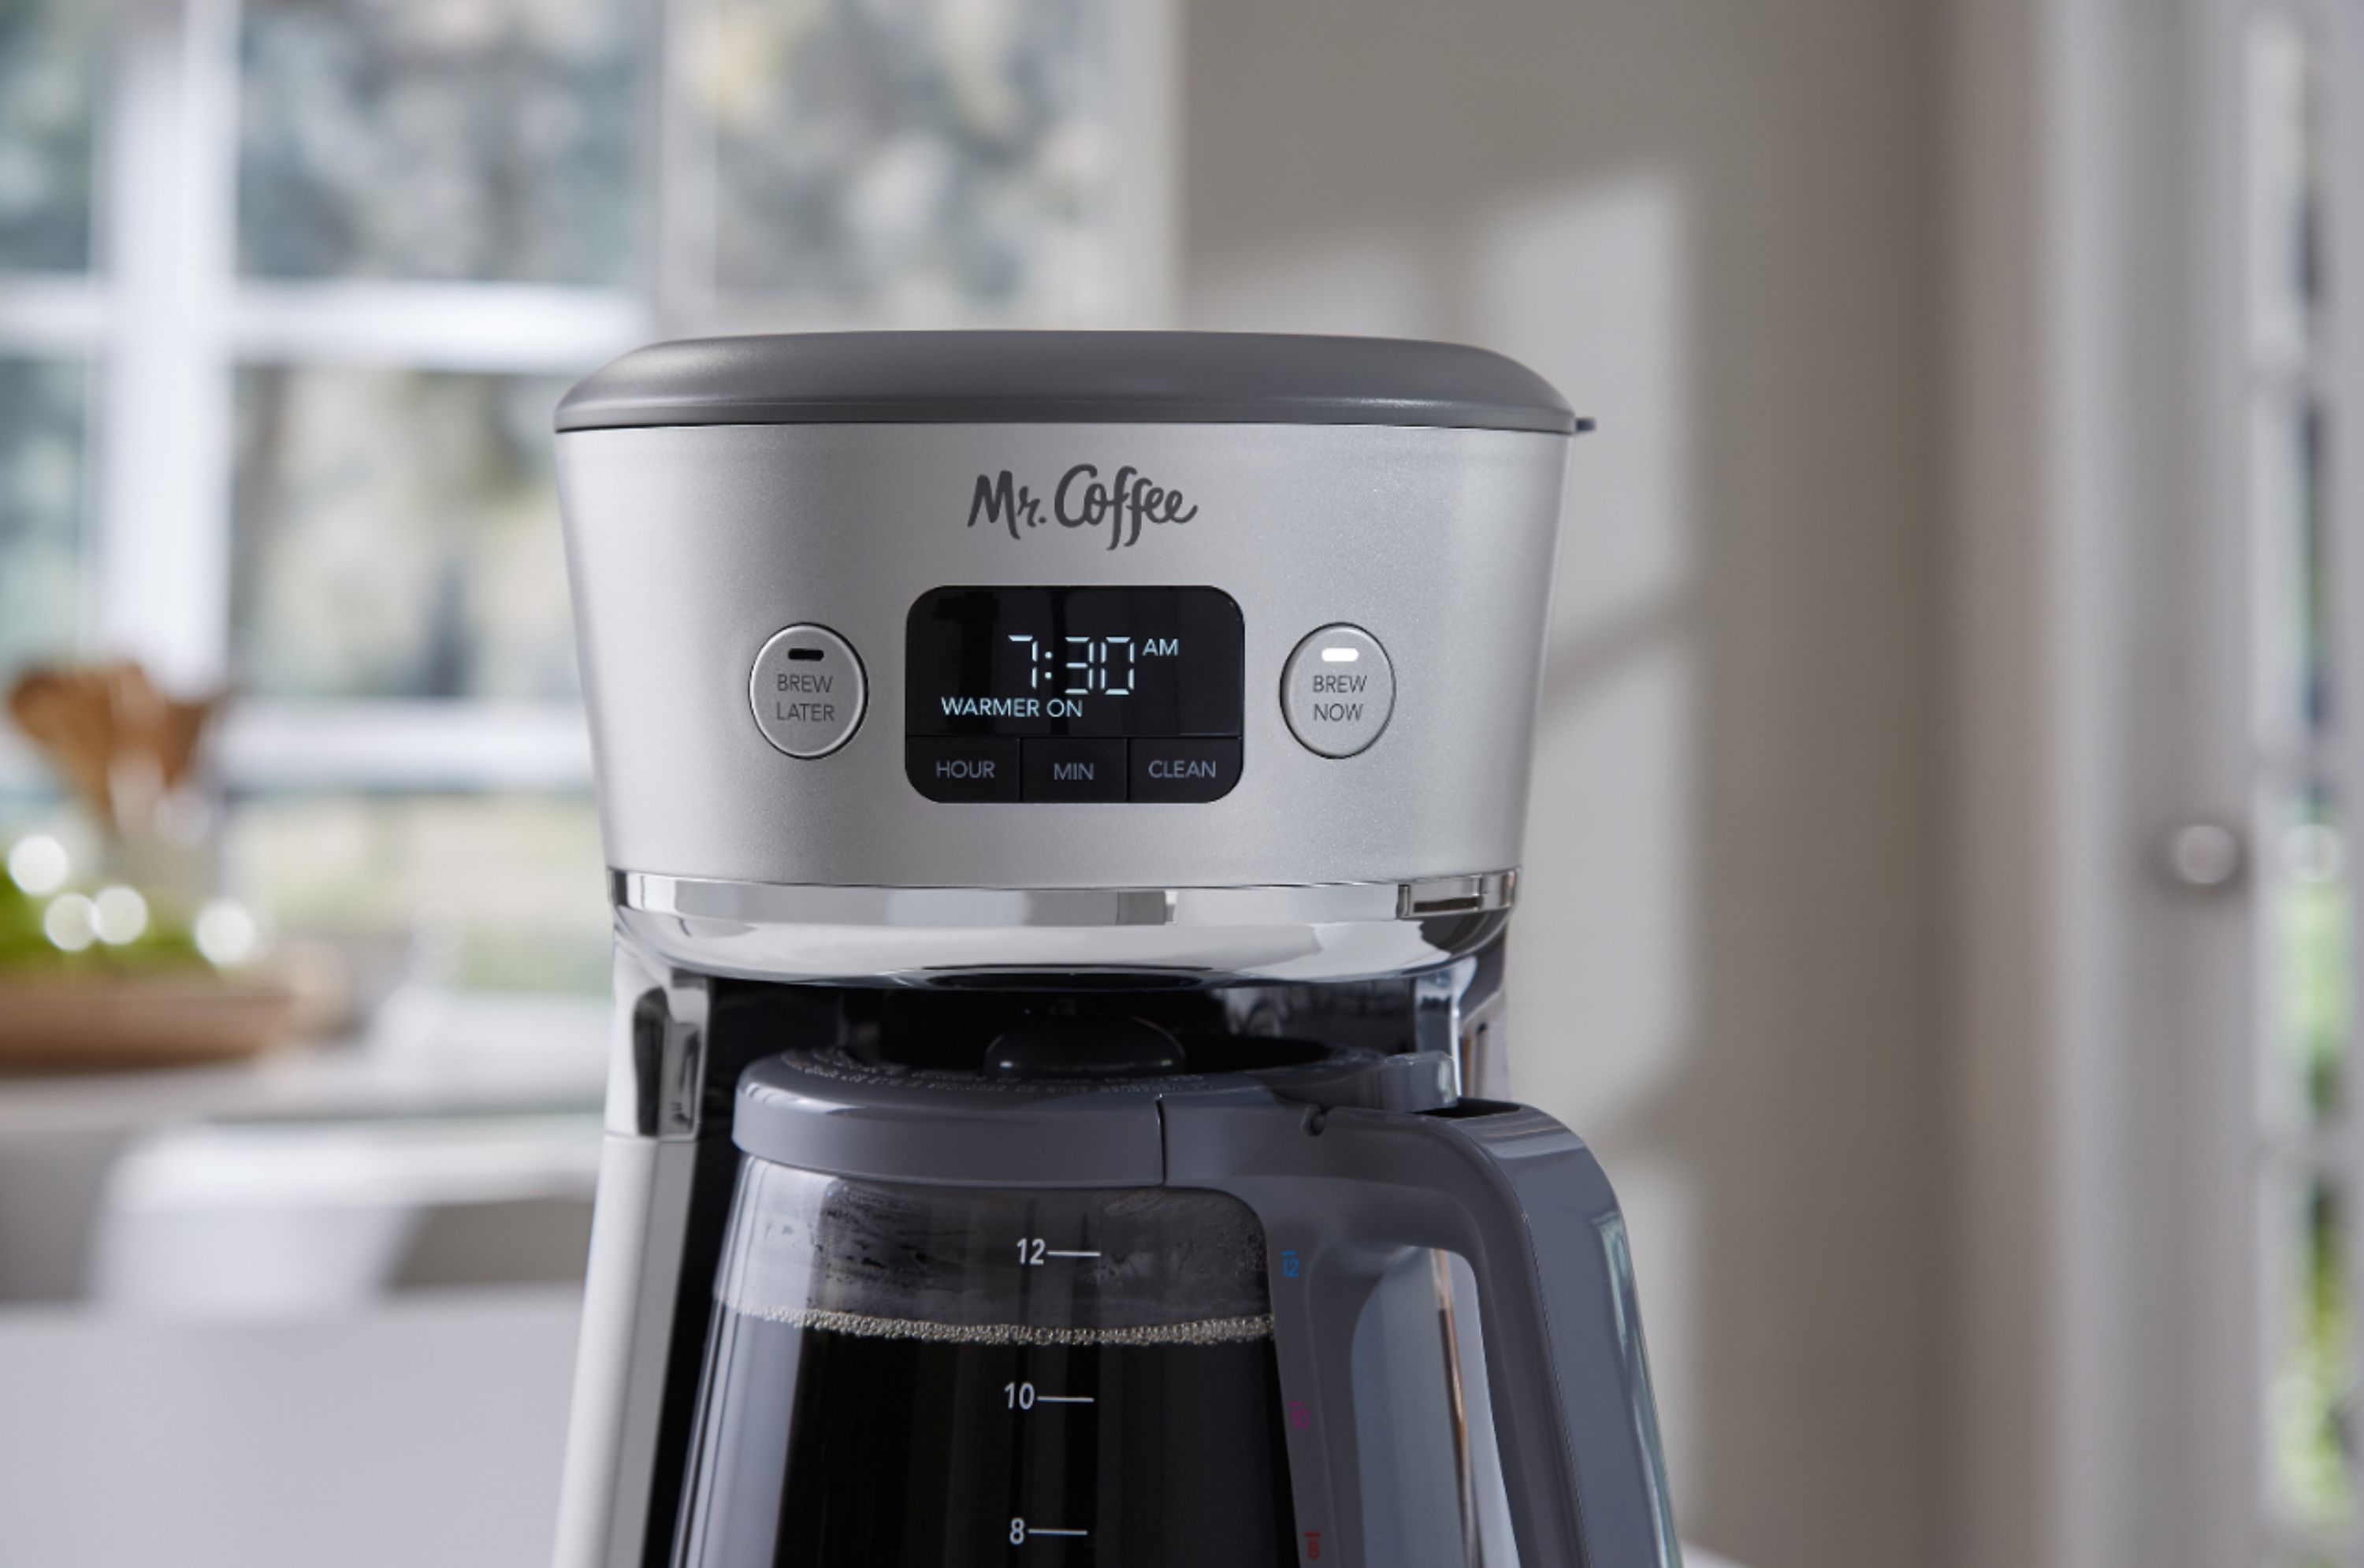  Mr. Coffee Easy Measure 12-Cup Programmable Coffee